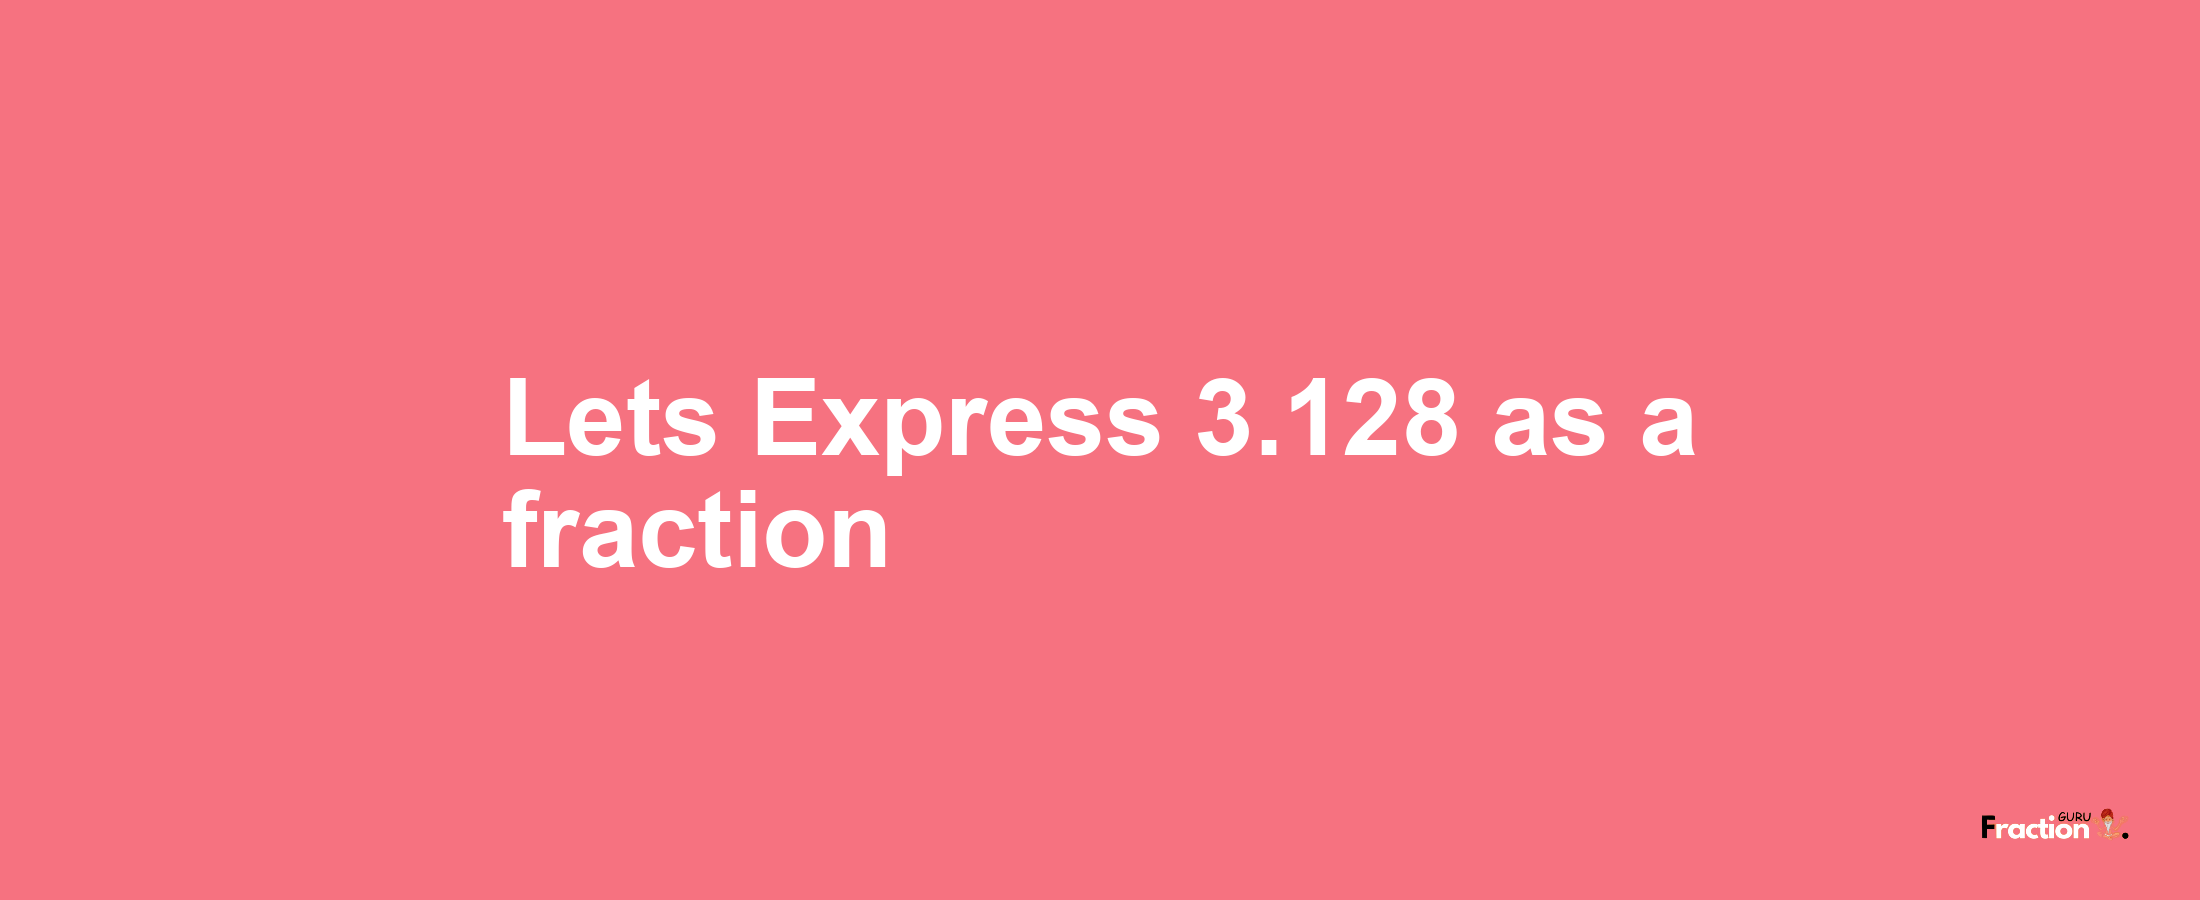 Lets Express 3.128 as afraction